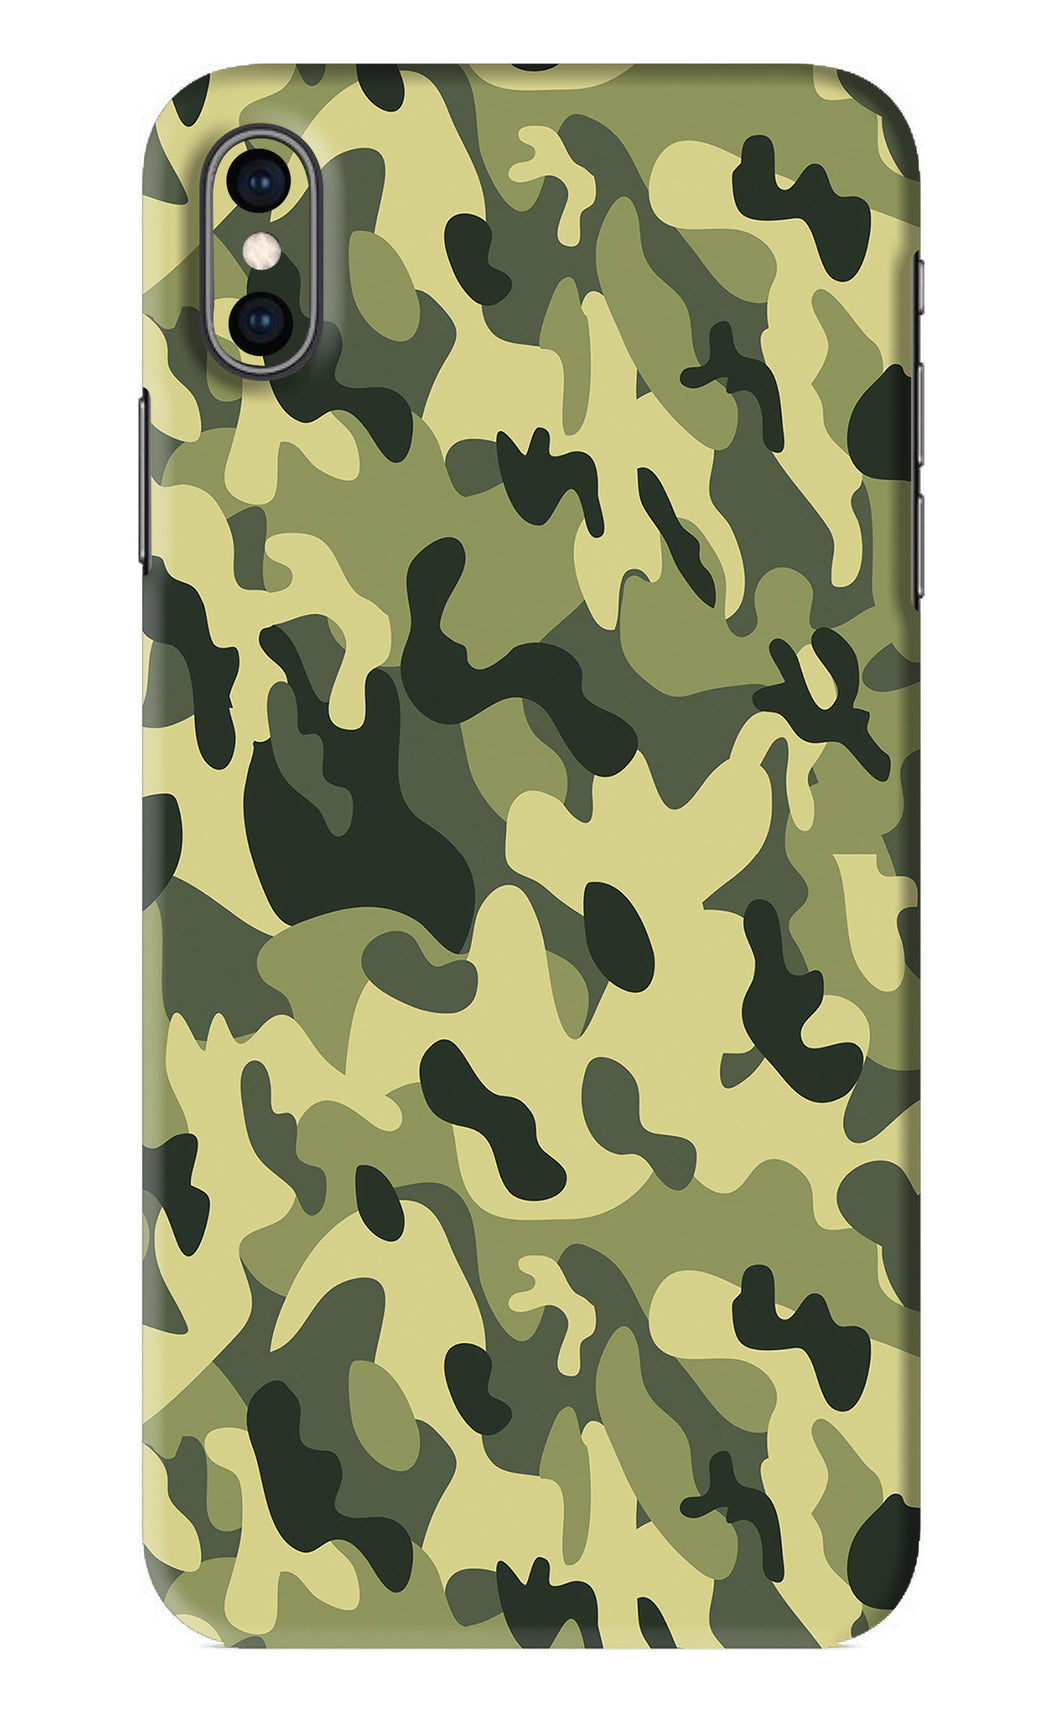 Camouflage iPhone XS Max Back Skin Wrap